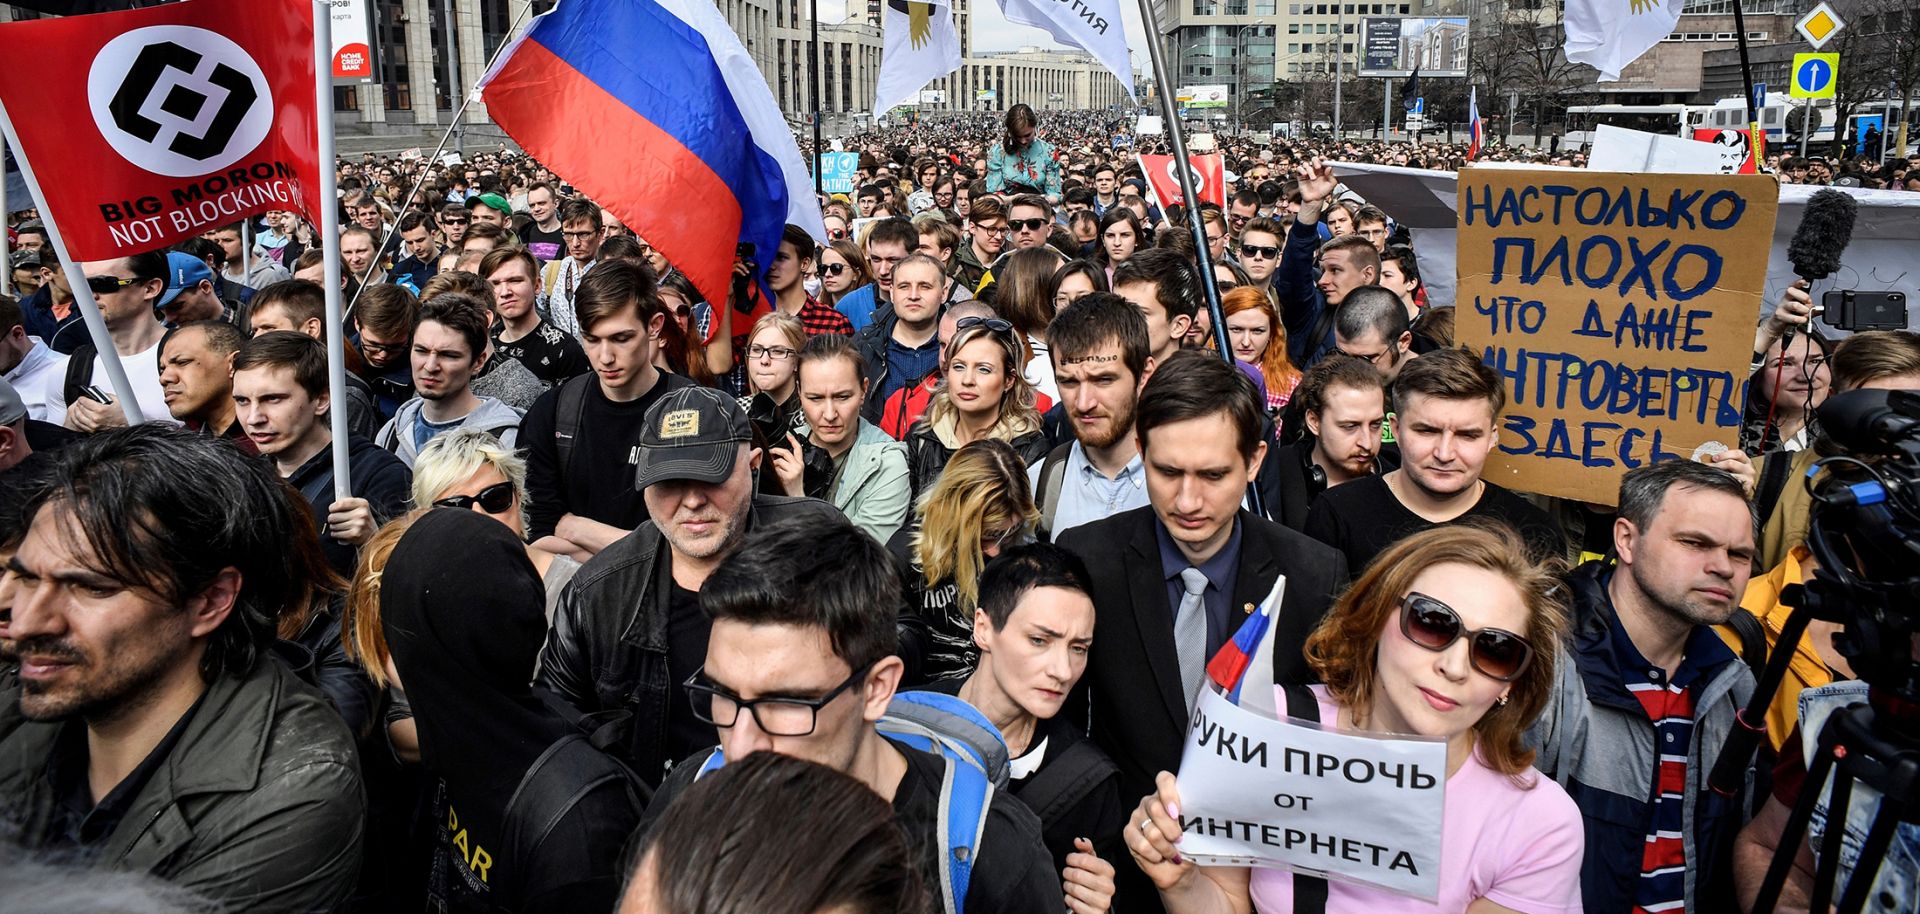 Russian citizens gather on the streets of Moscow to demand greater internet freedom in the country.